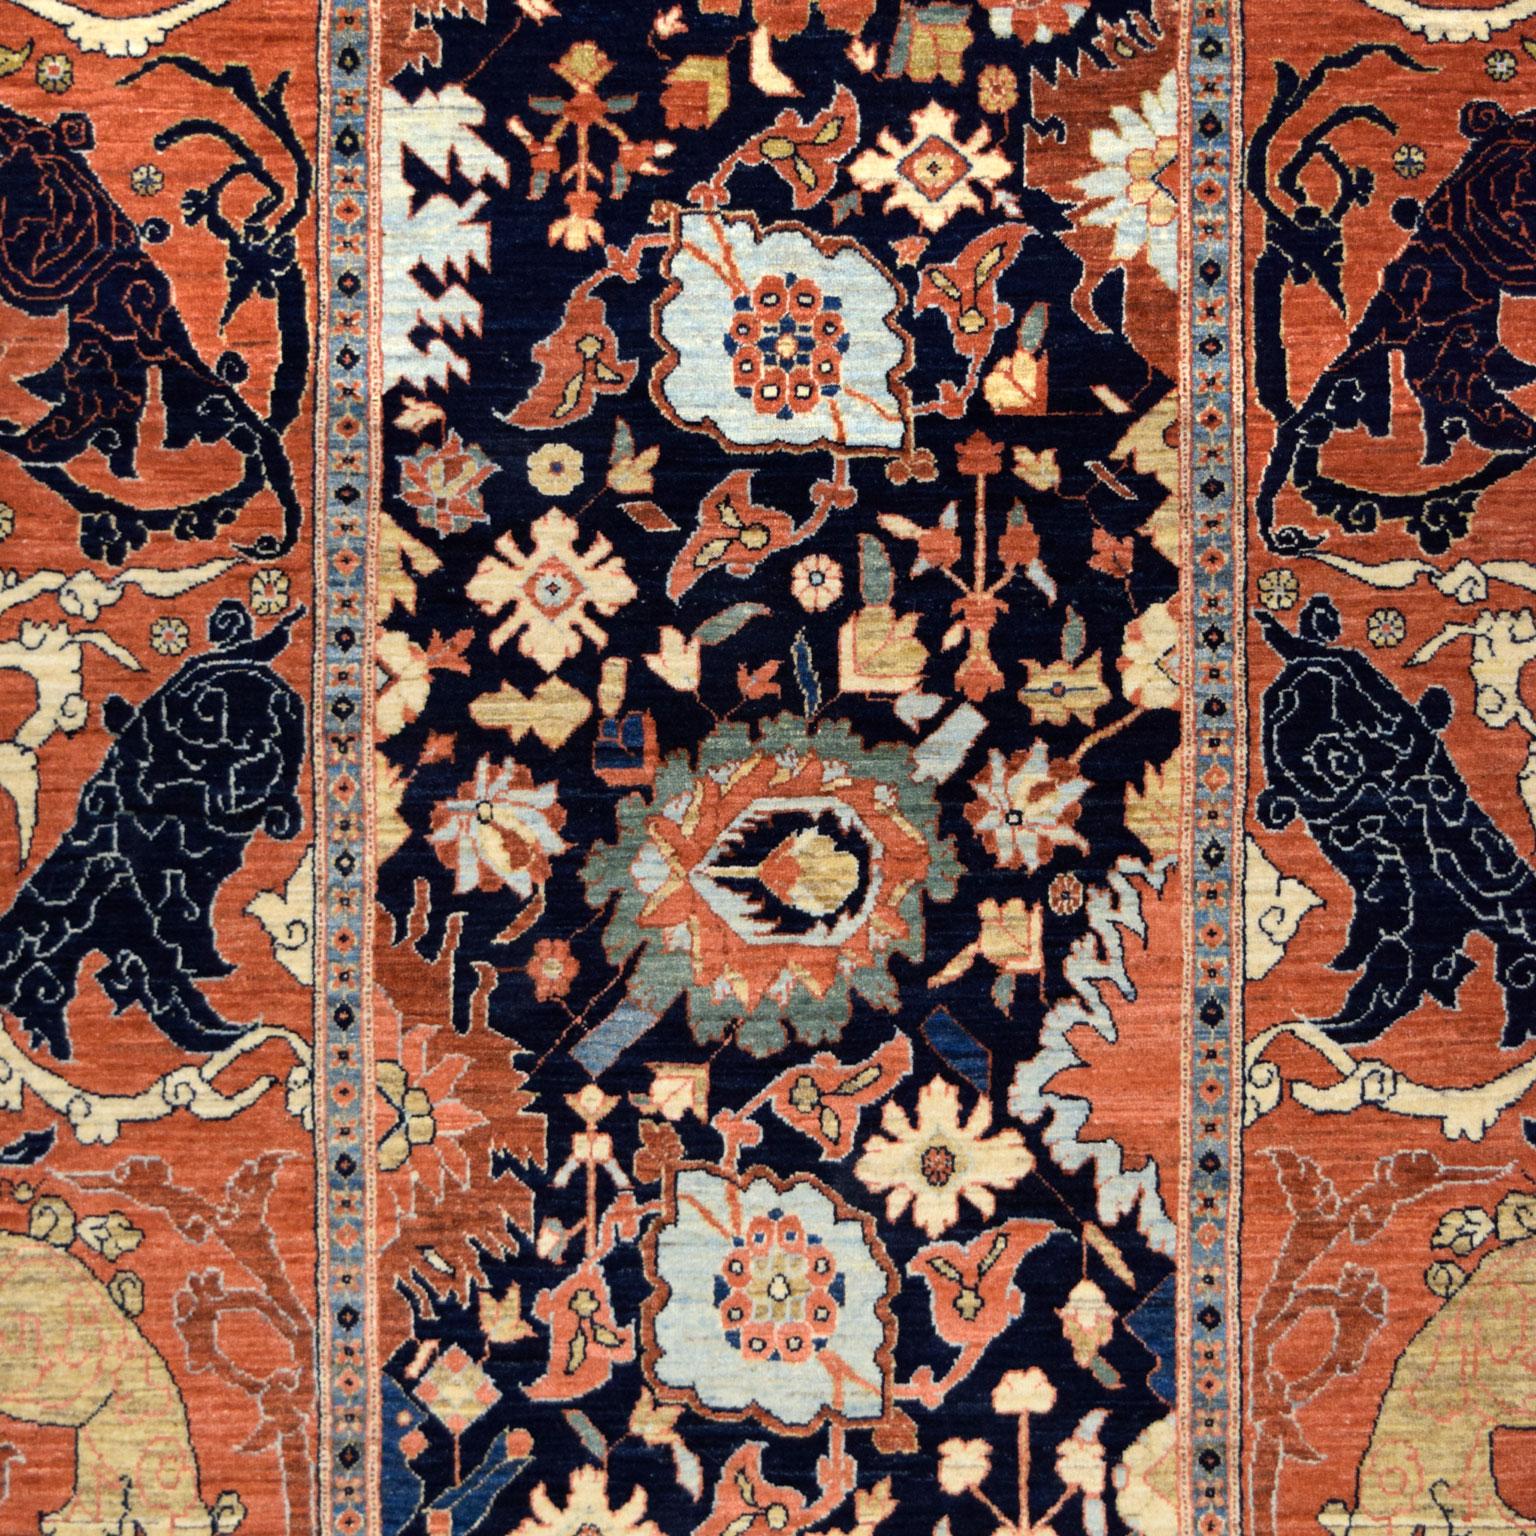 Featuring warm shades of orange, red, indigo, and taupe wool, this transitional Persian Bakhshayesh carpet is hand-knotted in Orley Shabahang's exclusive Shekarloo weave. Measuring 4'2